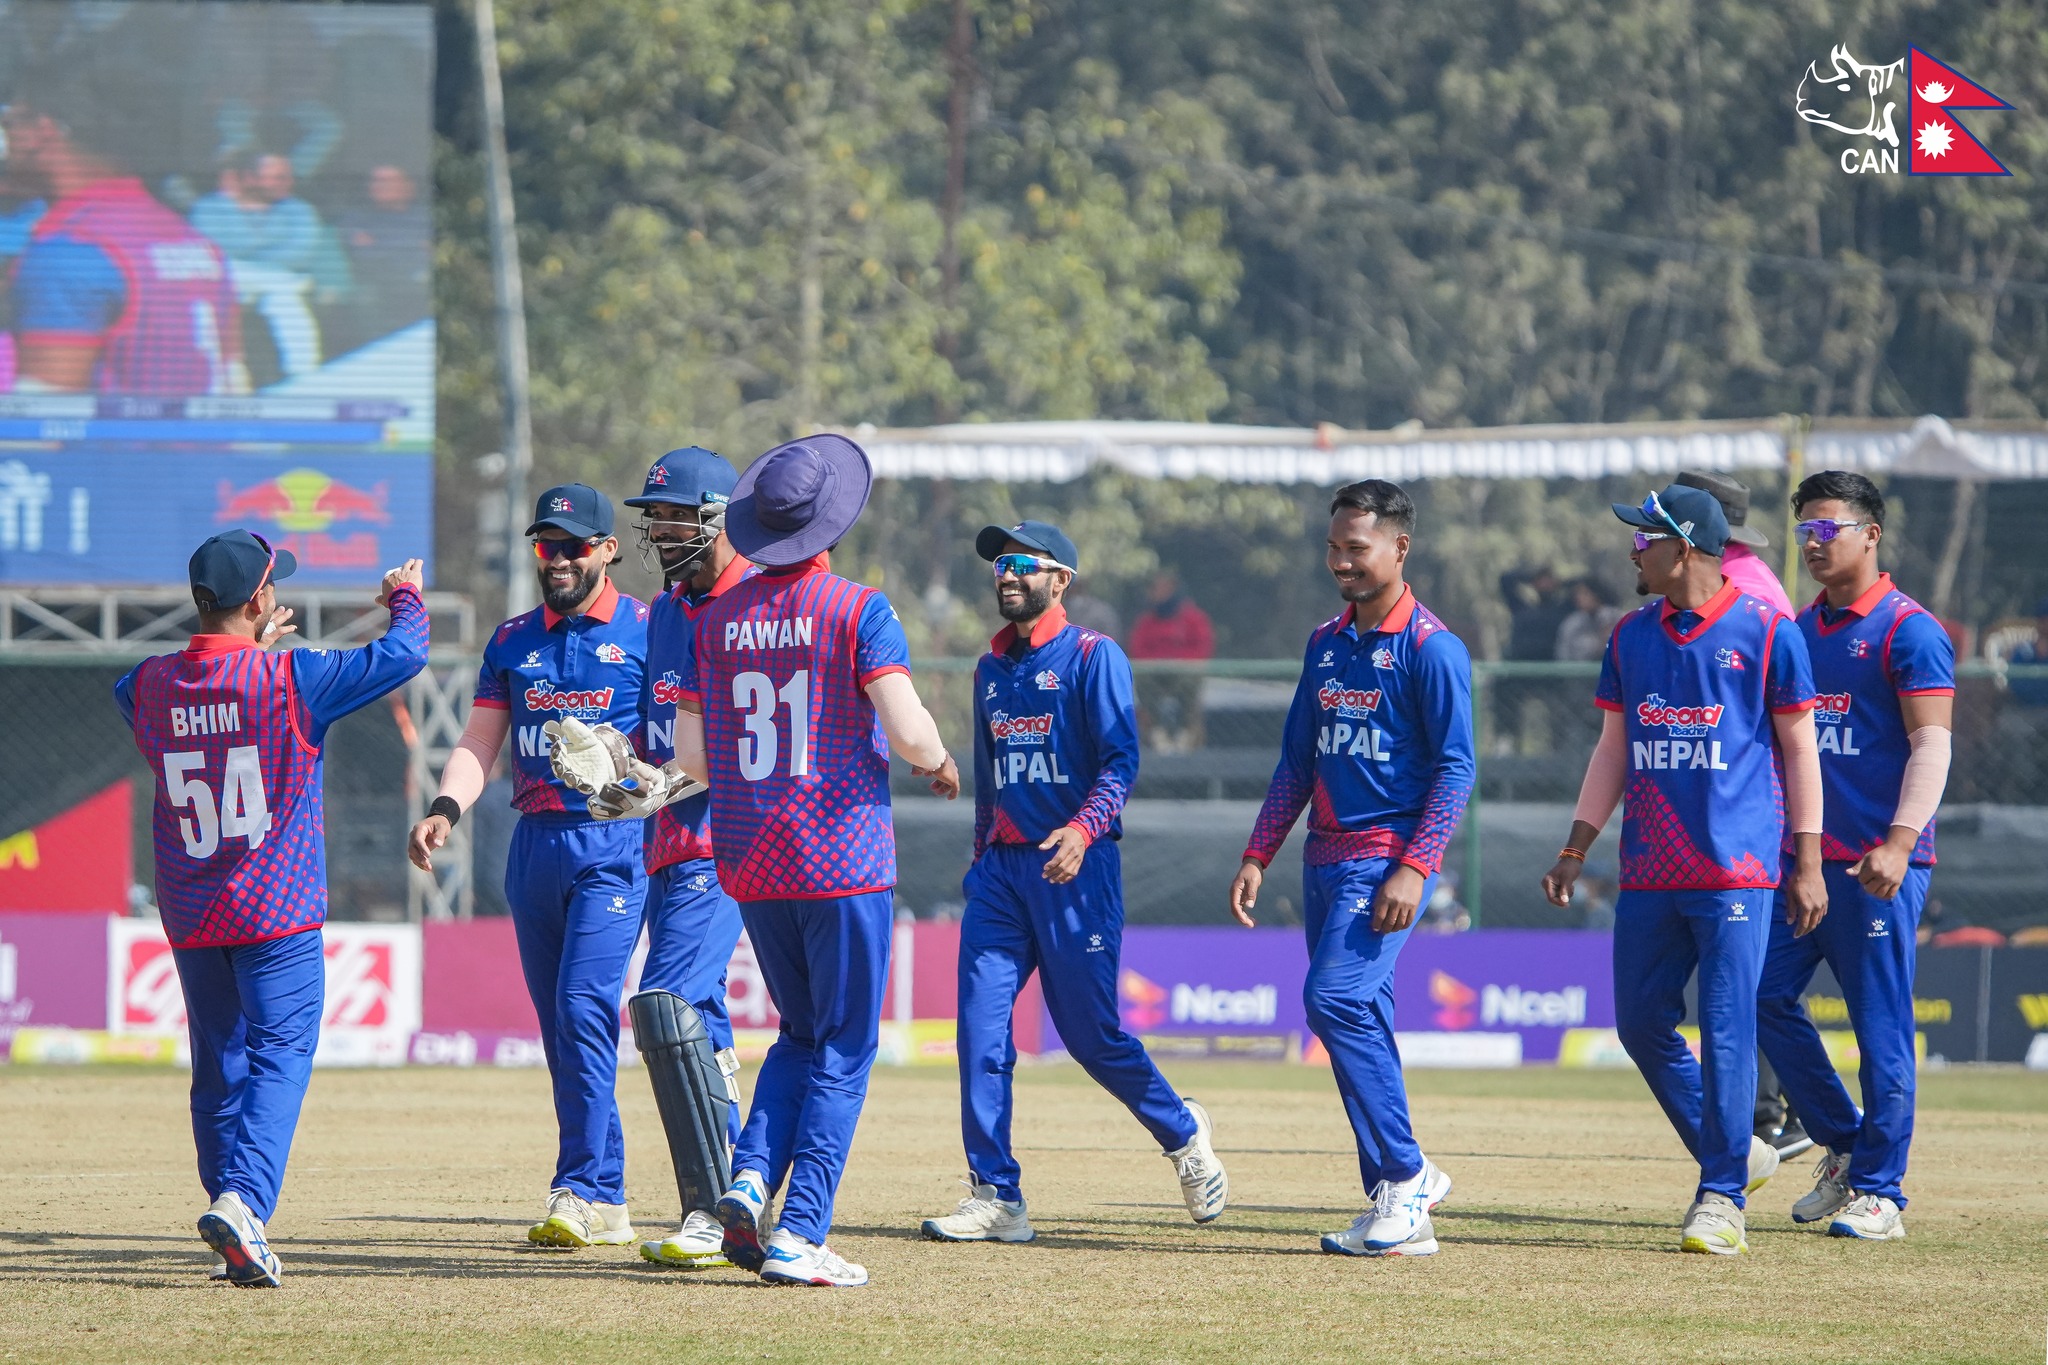 Nepal gets a target of 233 runs against Canada